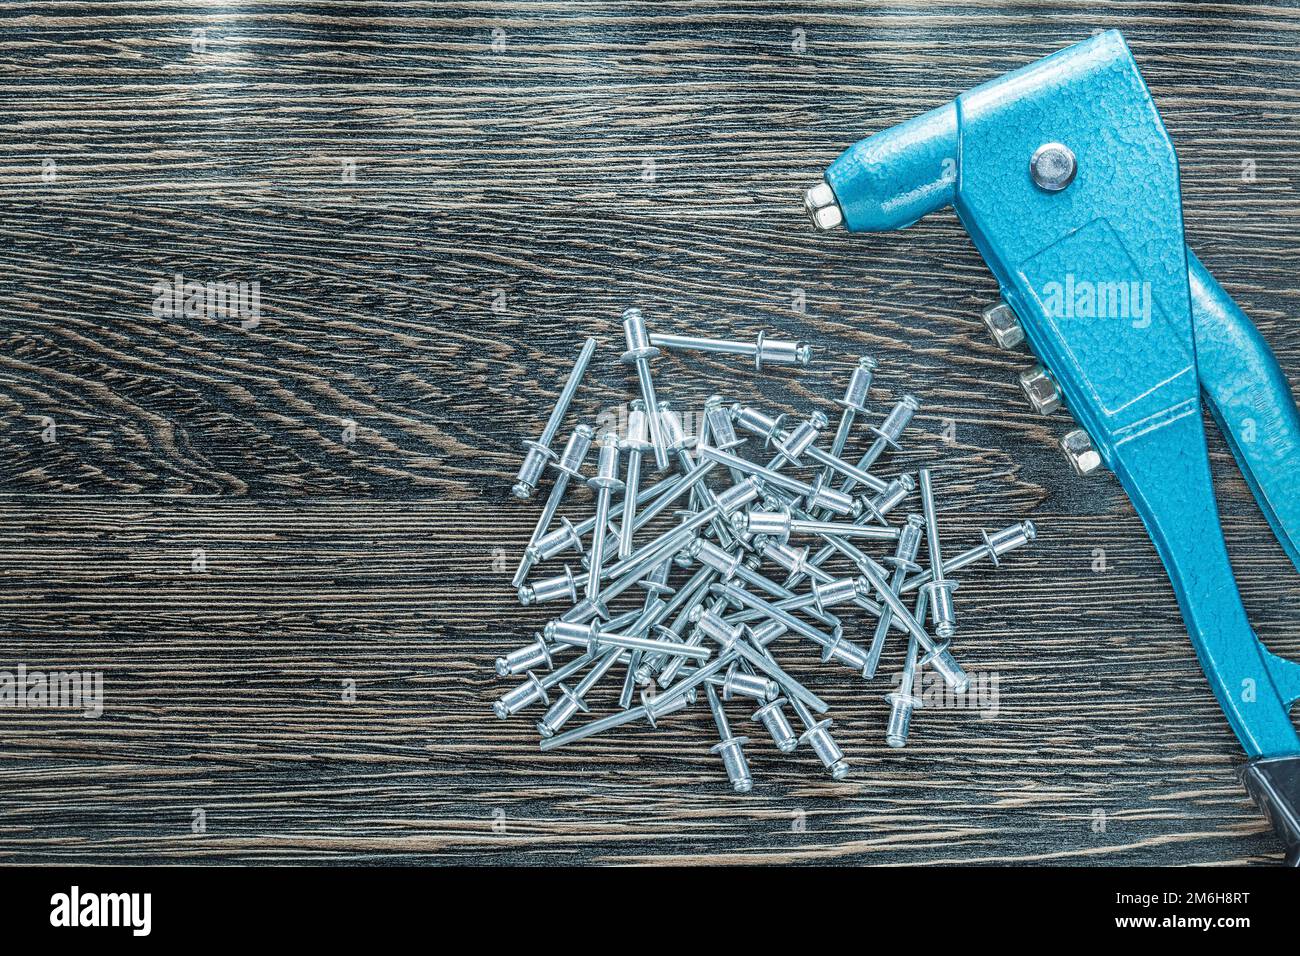 Riveting pliers stainless screws on wooden board. Stock Photo